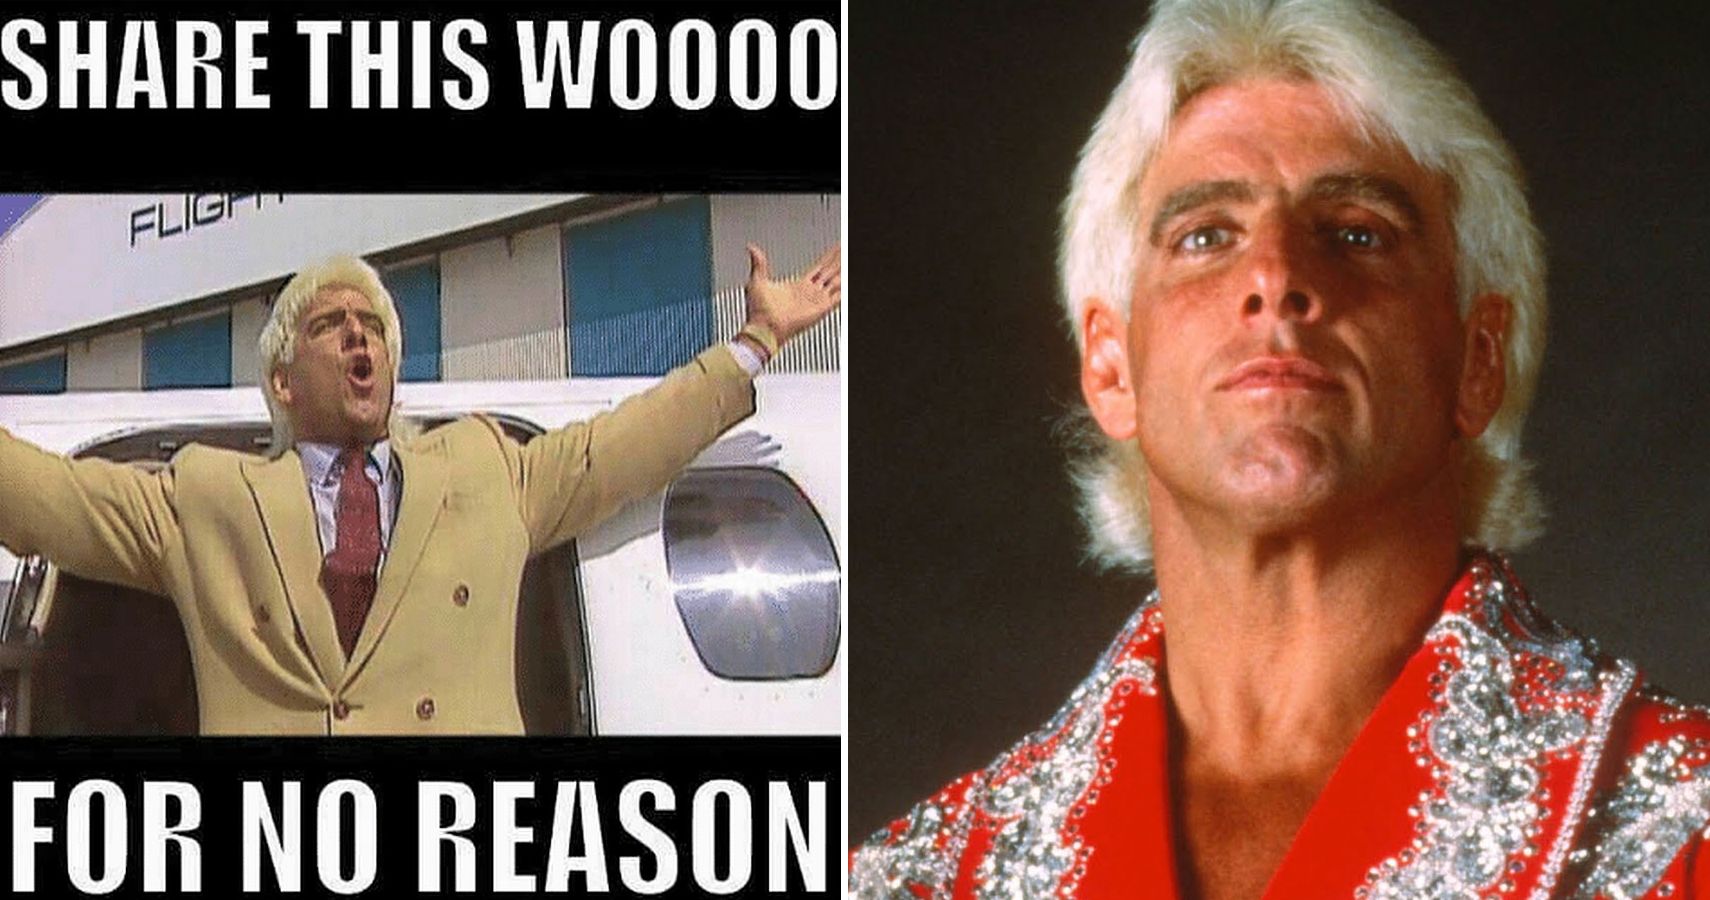 Woo! 10 Hilarious Ric Flair Memes | TheSportster